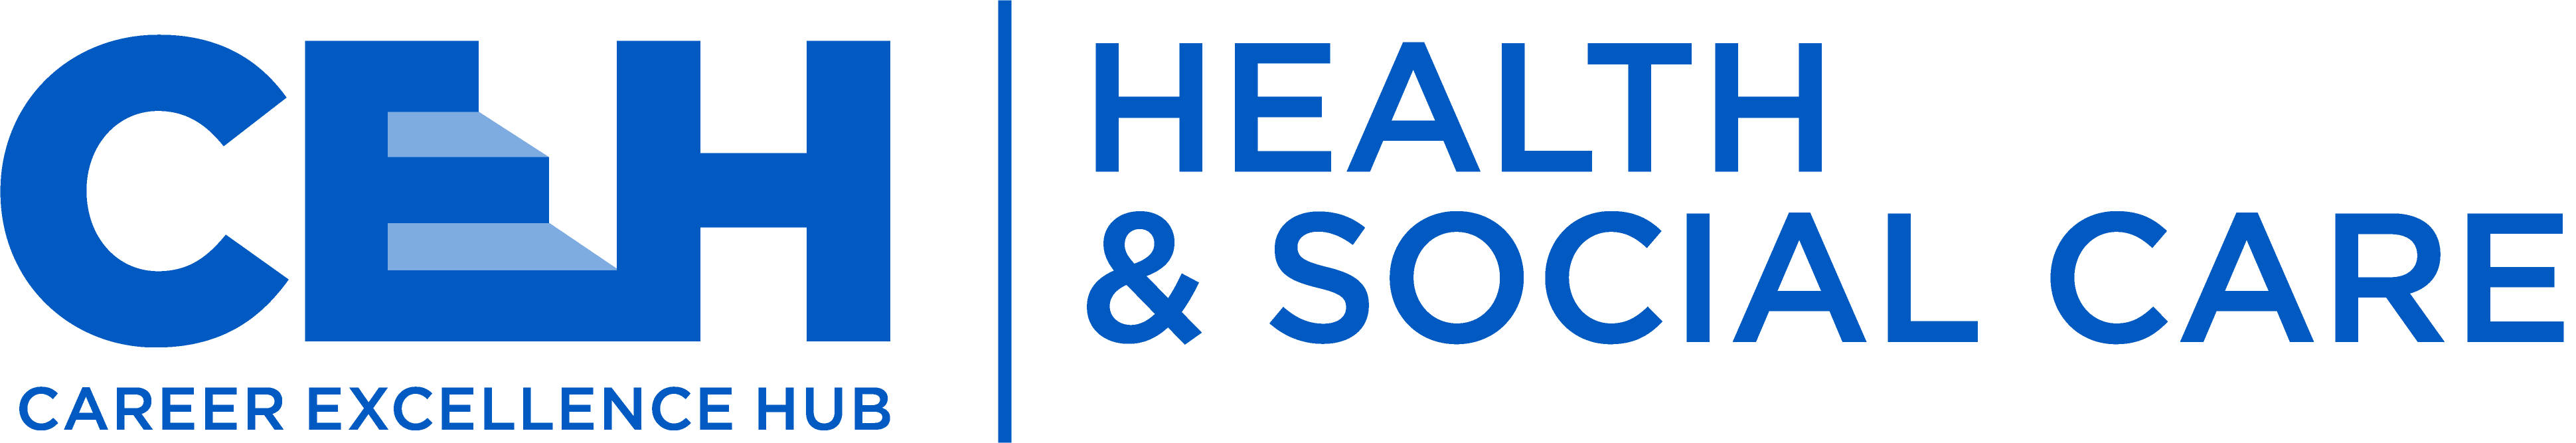 CEH health and social care